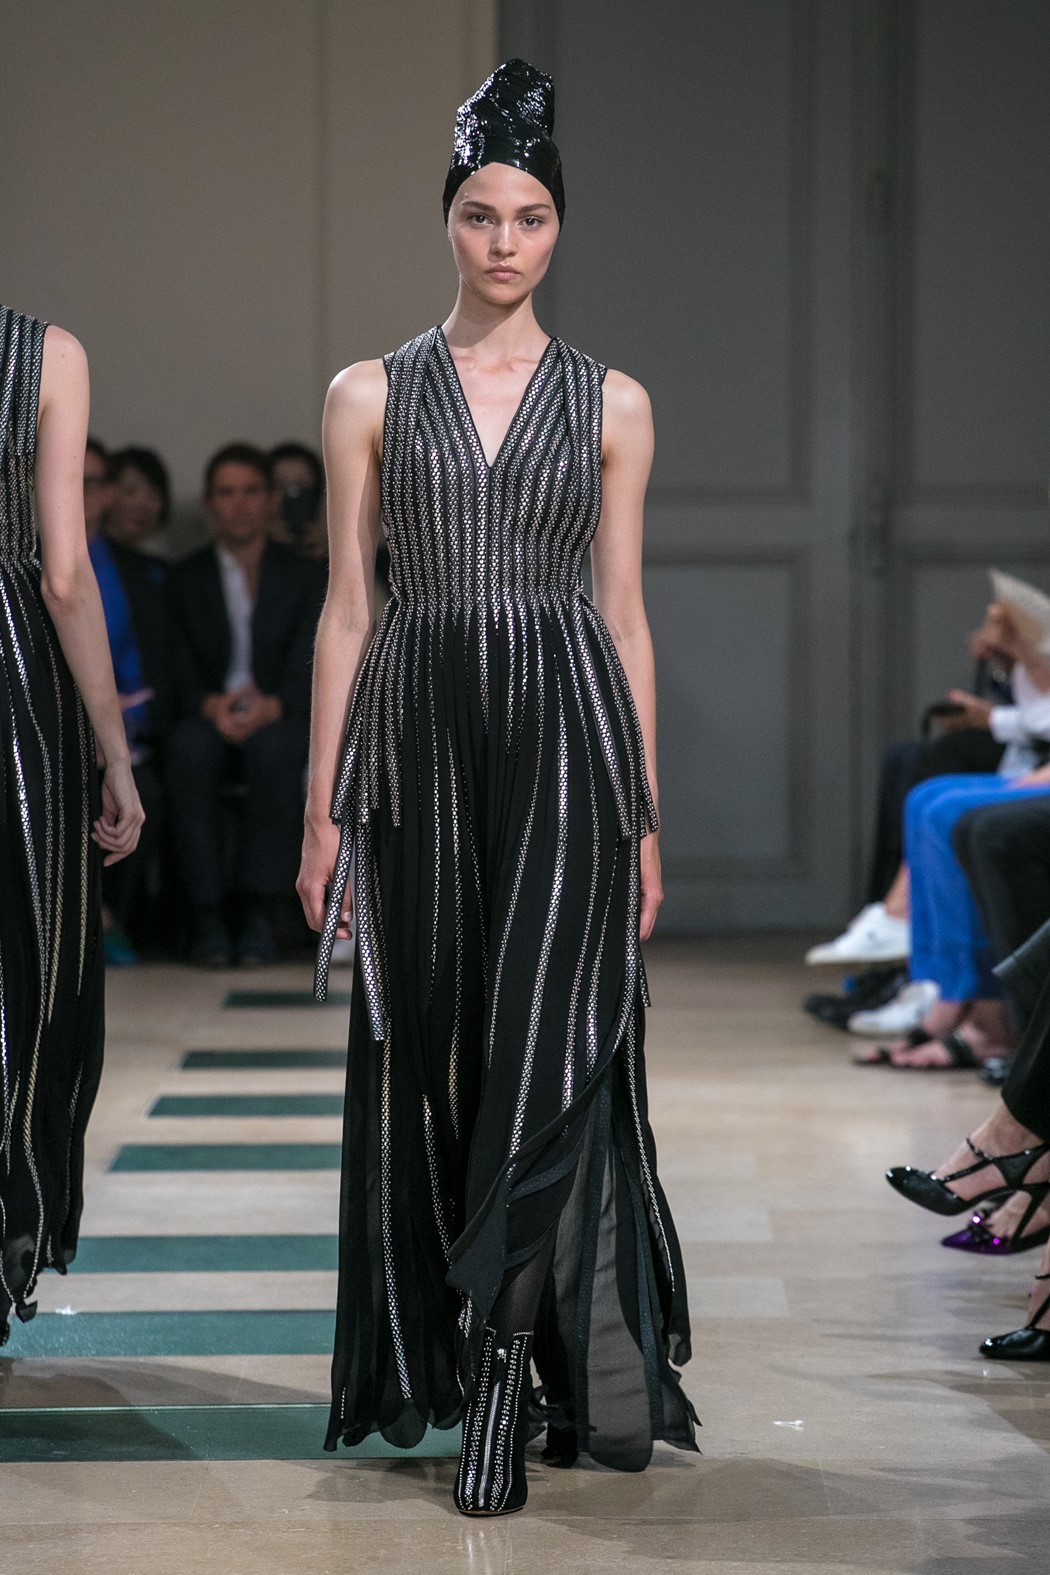 The Awe-Inspiring Brilliance of Alaïa Haute Couture | AnOther